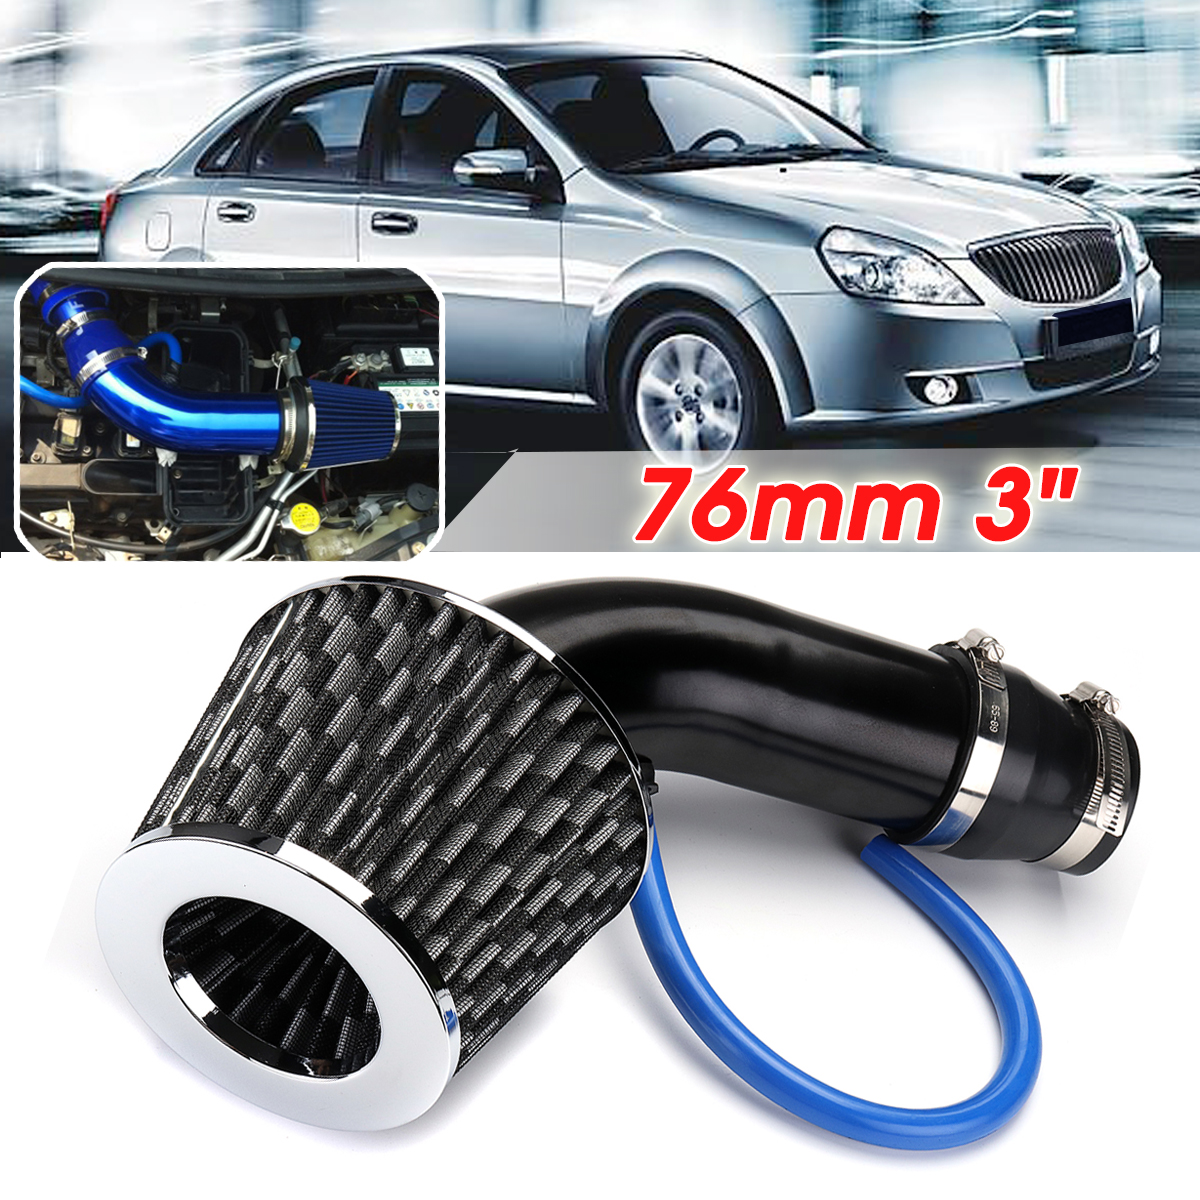 76mm-3-Inch-Universal-Car-Cold-Air-Intake-Filter-and-Alumimum-Induction-Kit-Pipe-Hose-1391261